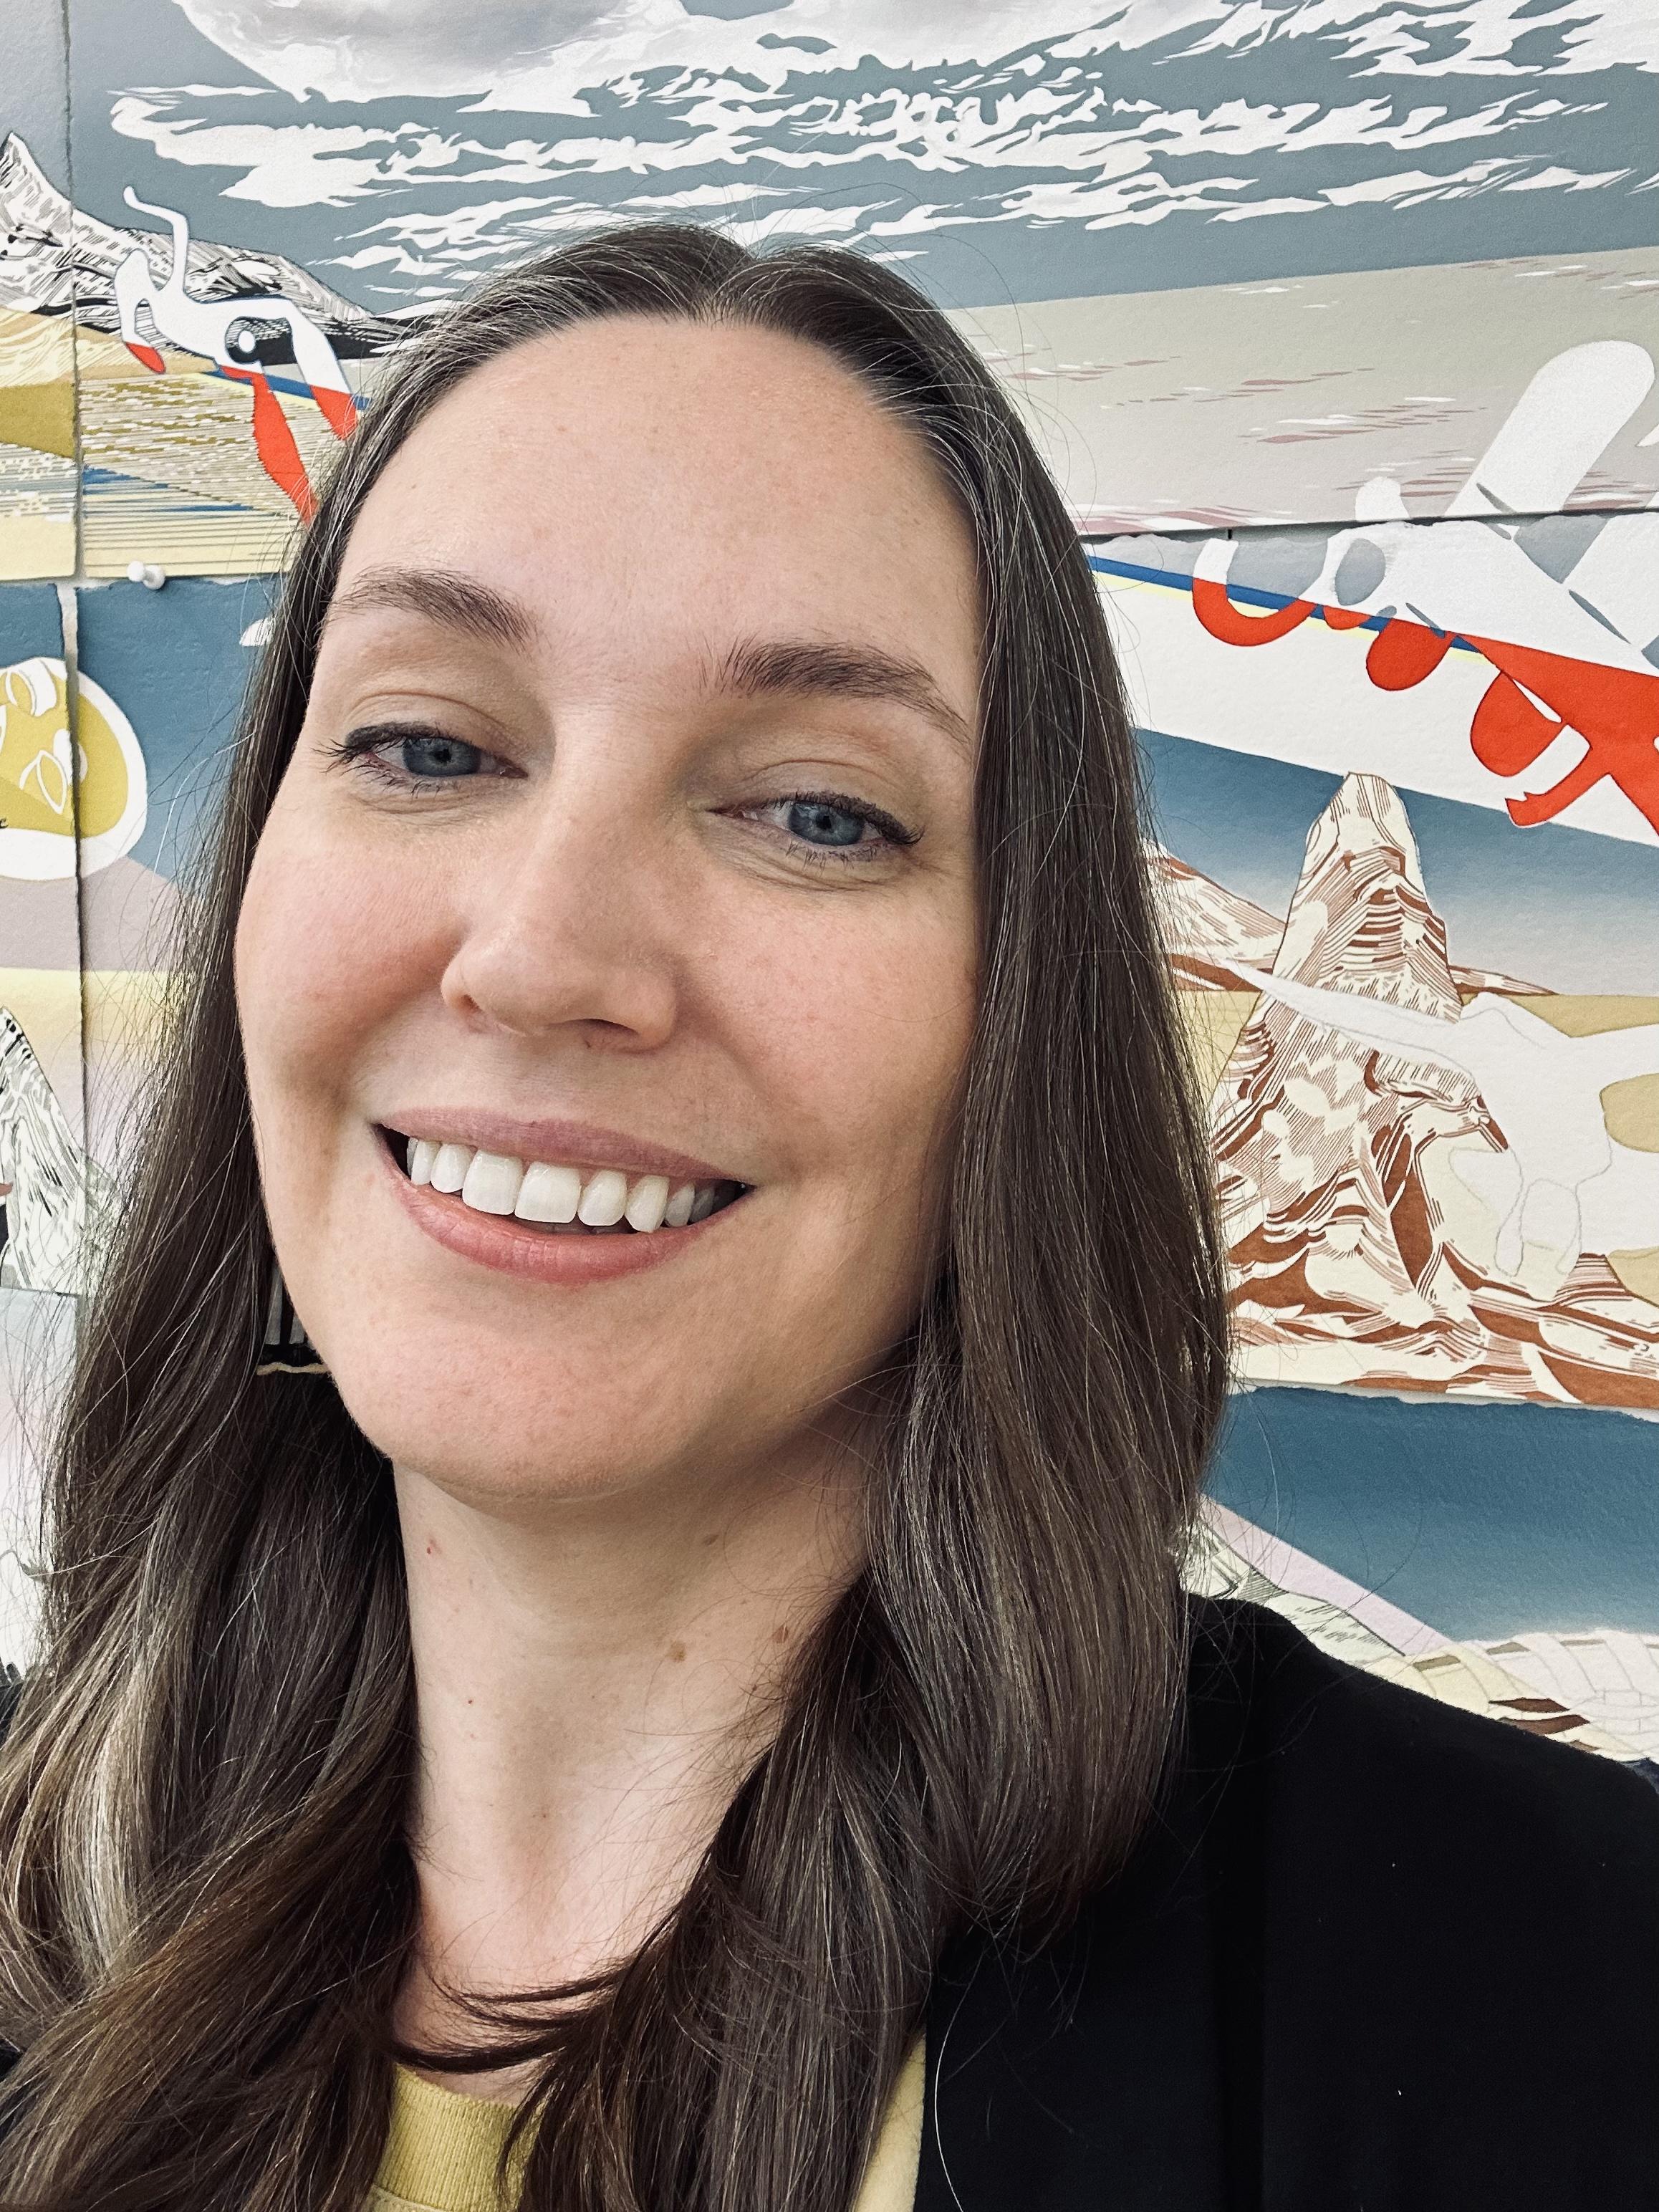 Selfie-like portrait of a woman with long brown hair posing in front of a large artwork.